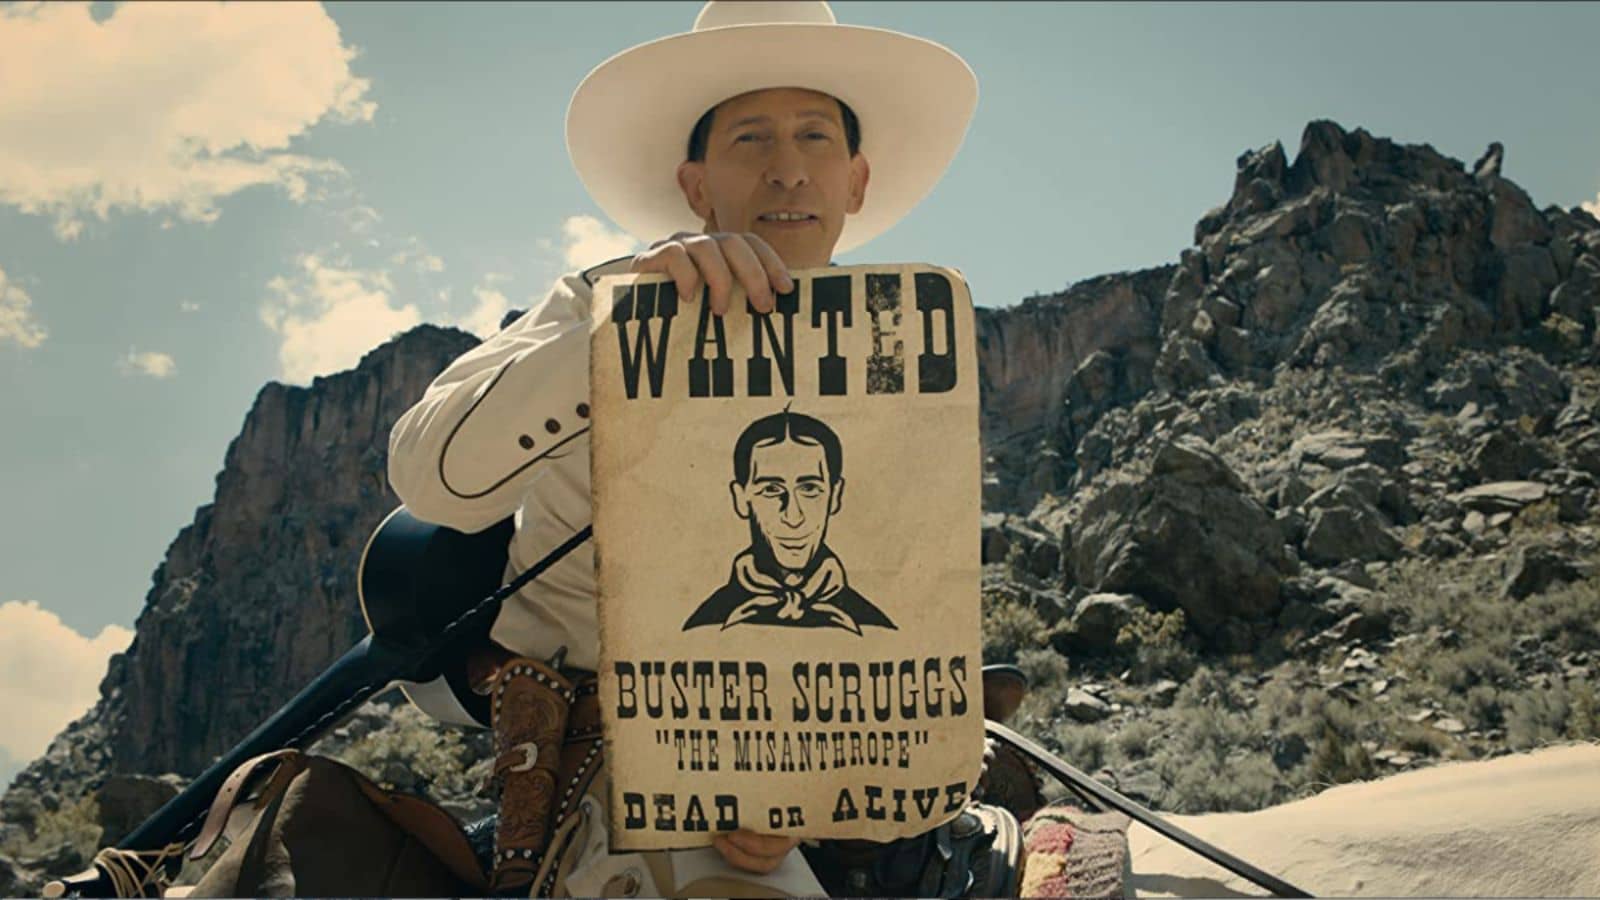 <p>The first anthology movie the Coen brothers made and their first as a Netflix Original, <i>The Ballad of Buster Scruggs</i> is the flagship of six western shorts. Each one occurs in the post-Civil War, manifest-destiny American wild west. Coen brothers and western movies’ synergy is a match made in Heaven.</p><p>As demonstrated in <i>True Grit,</i> they refresh tired western tropes and add zany humanity to their characters. Furthermore, their brand of black comedy makes an ample bedfellow for such a brutally violent period of American history, though with a touch of philosophical optimism. Not all the films hit the mark, but <i>Near Algodones, All Gold Canyon,</i> and the title film justify watching this unique collection.</p>